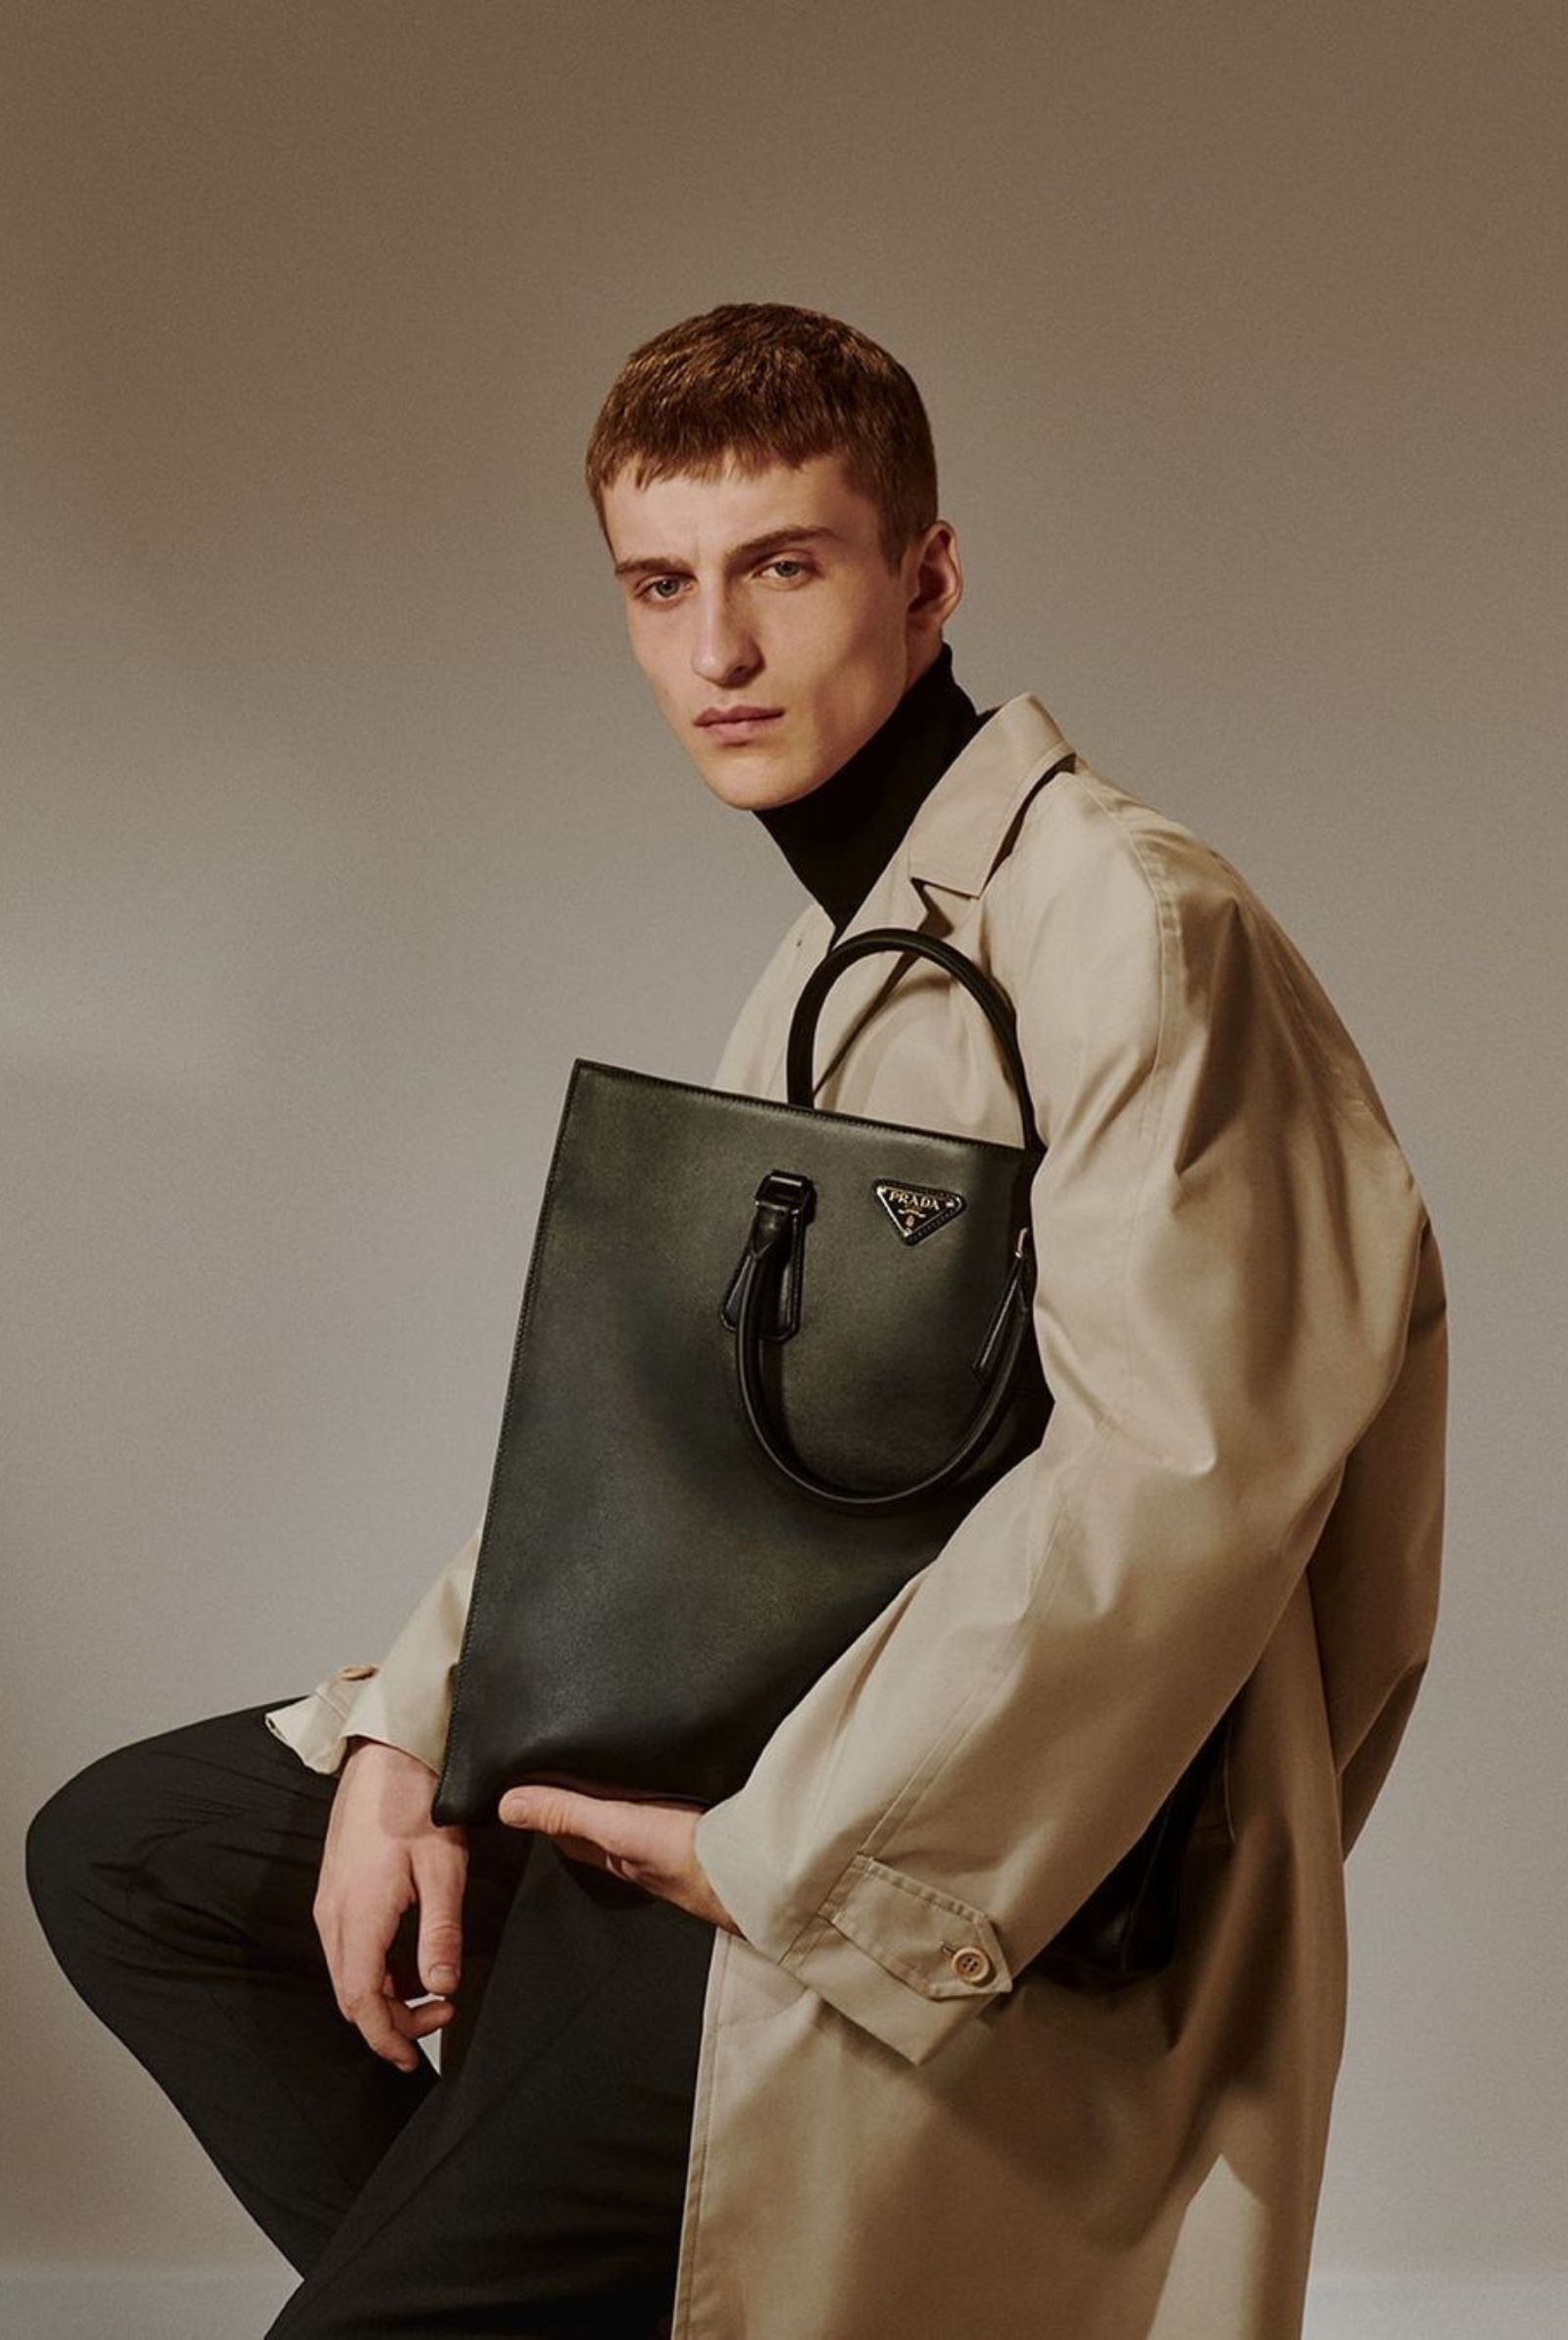 7 Bags Every Man Should Have and Why - Tote bag